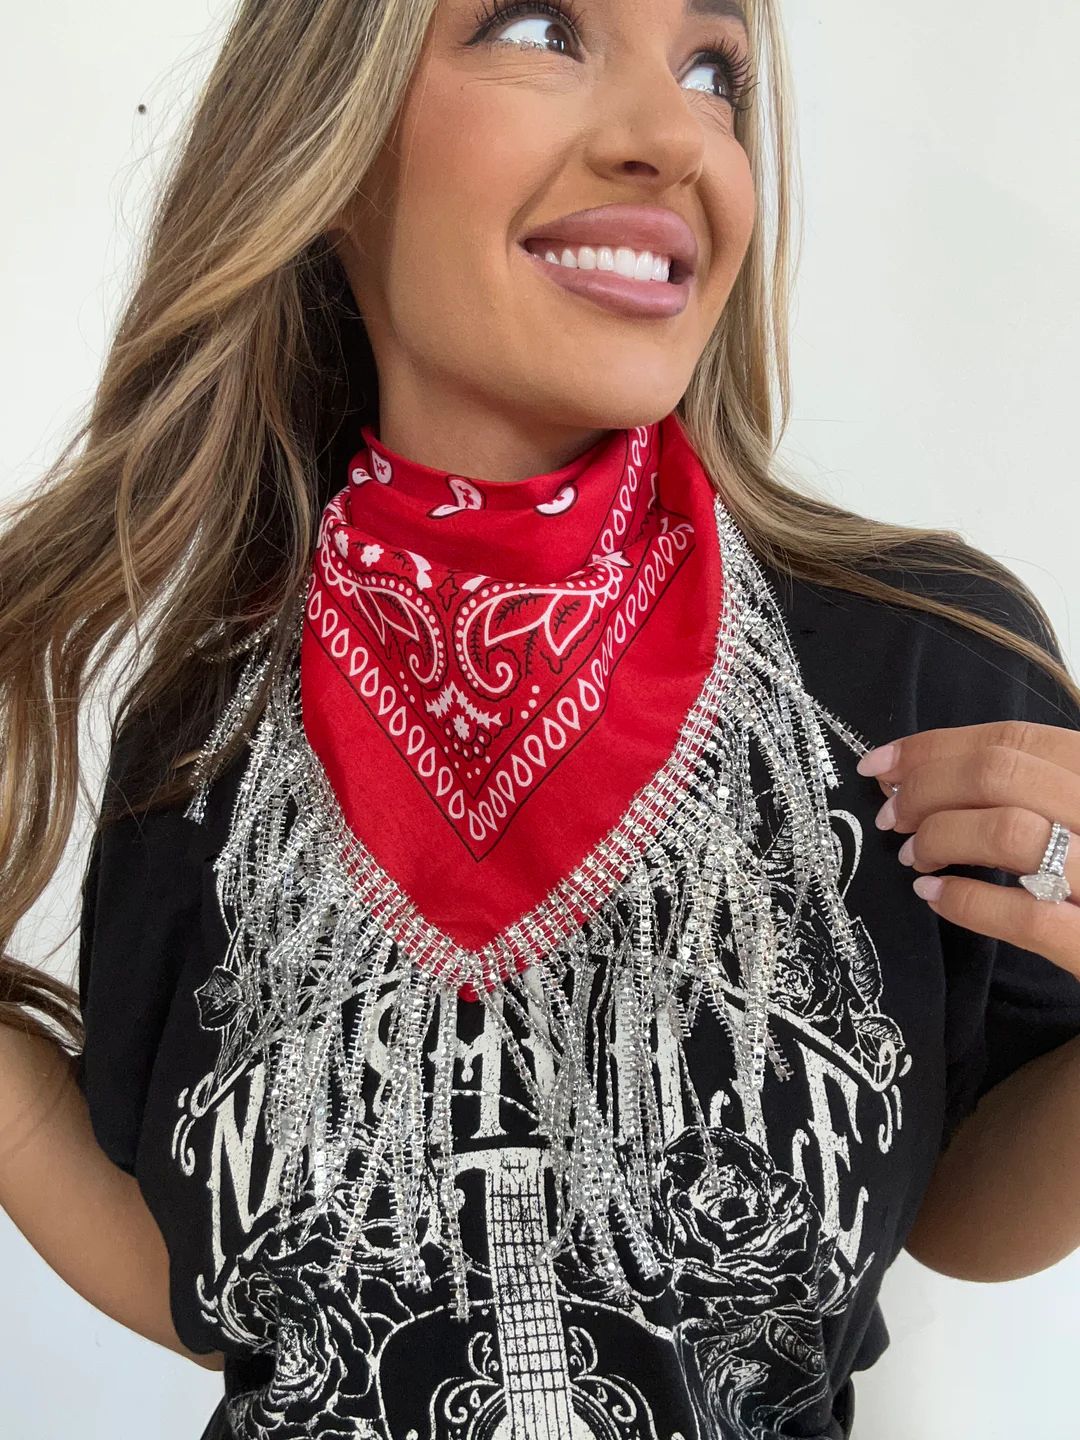 Hold Your Horses Rhinestone Bandana Scarf Top | Willow Boutique